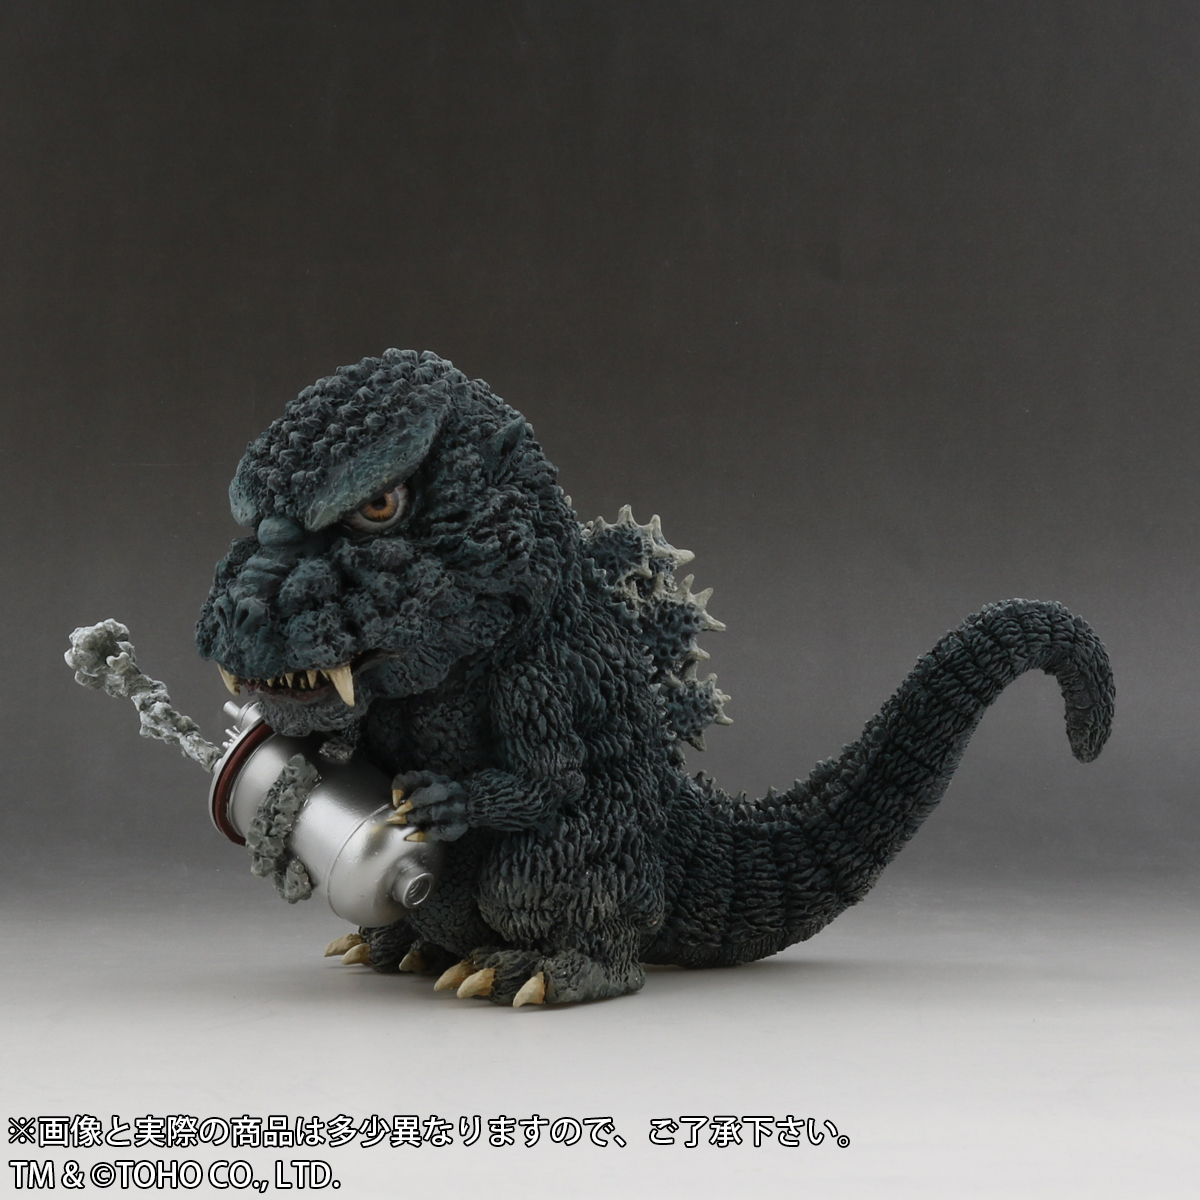 X-PLUS Deforeal Godzilla 1984 with Reactor parts Ric toy limited edition figure 